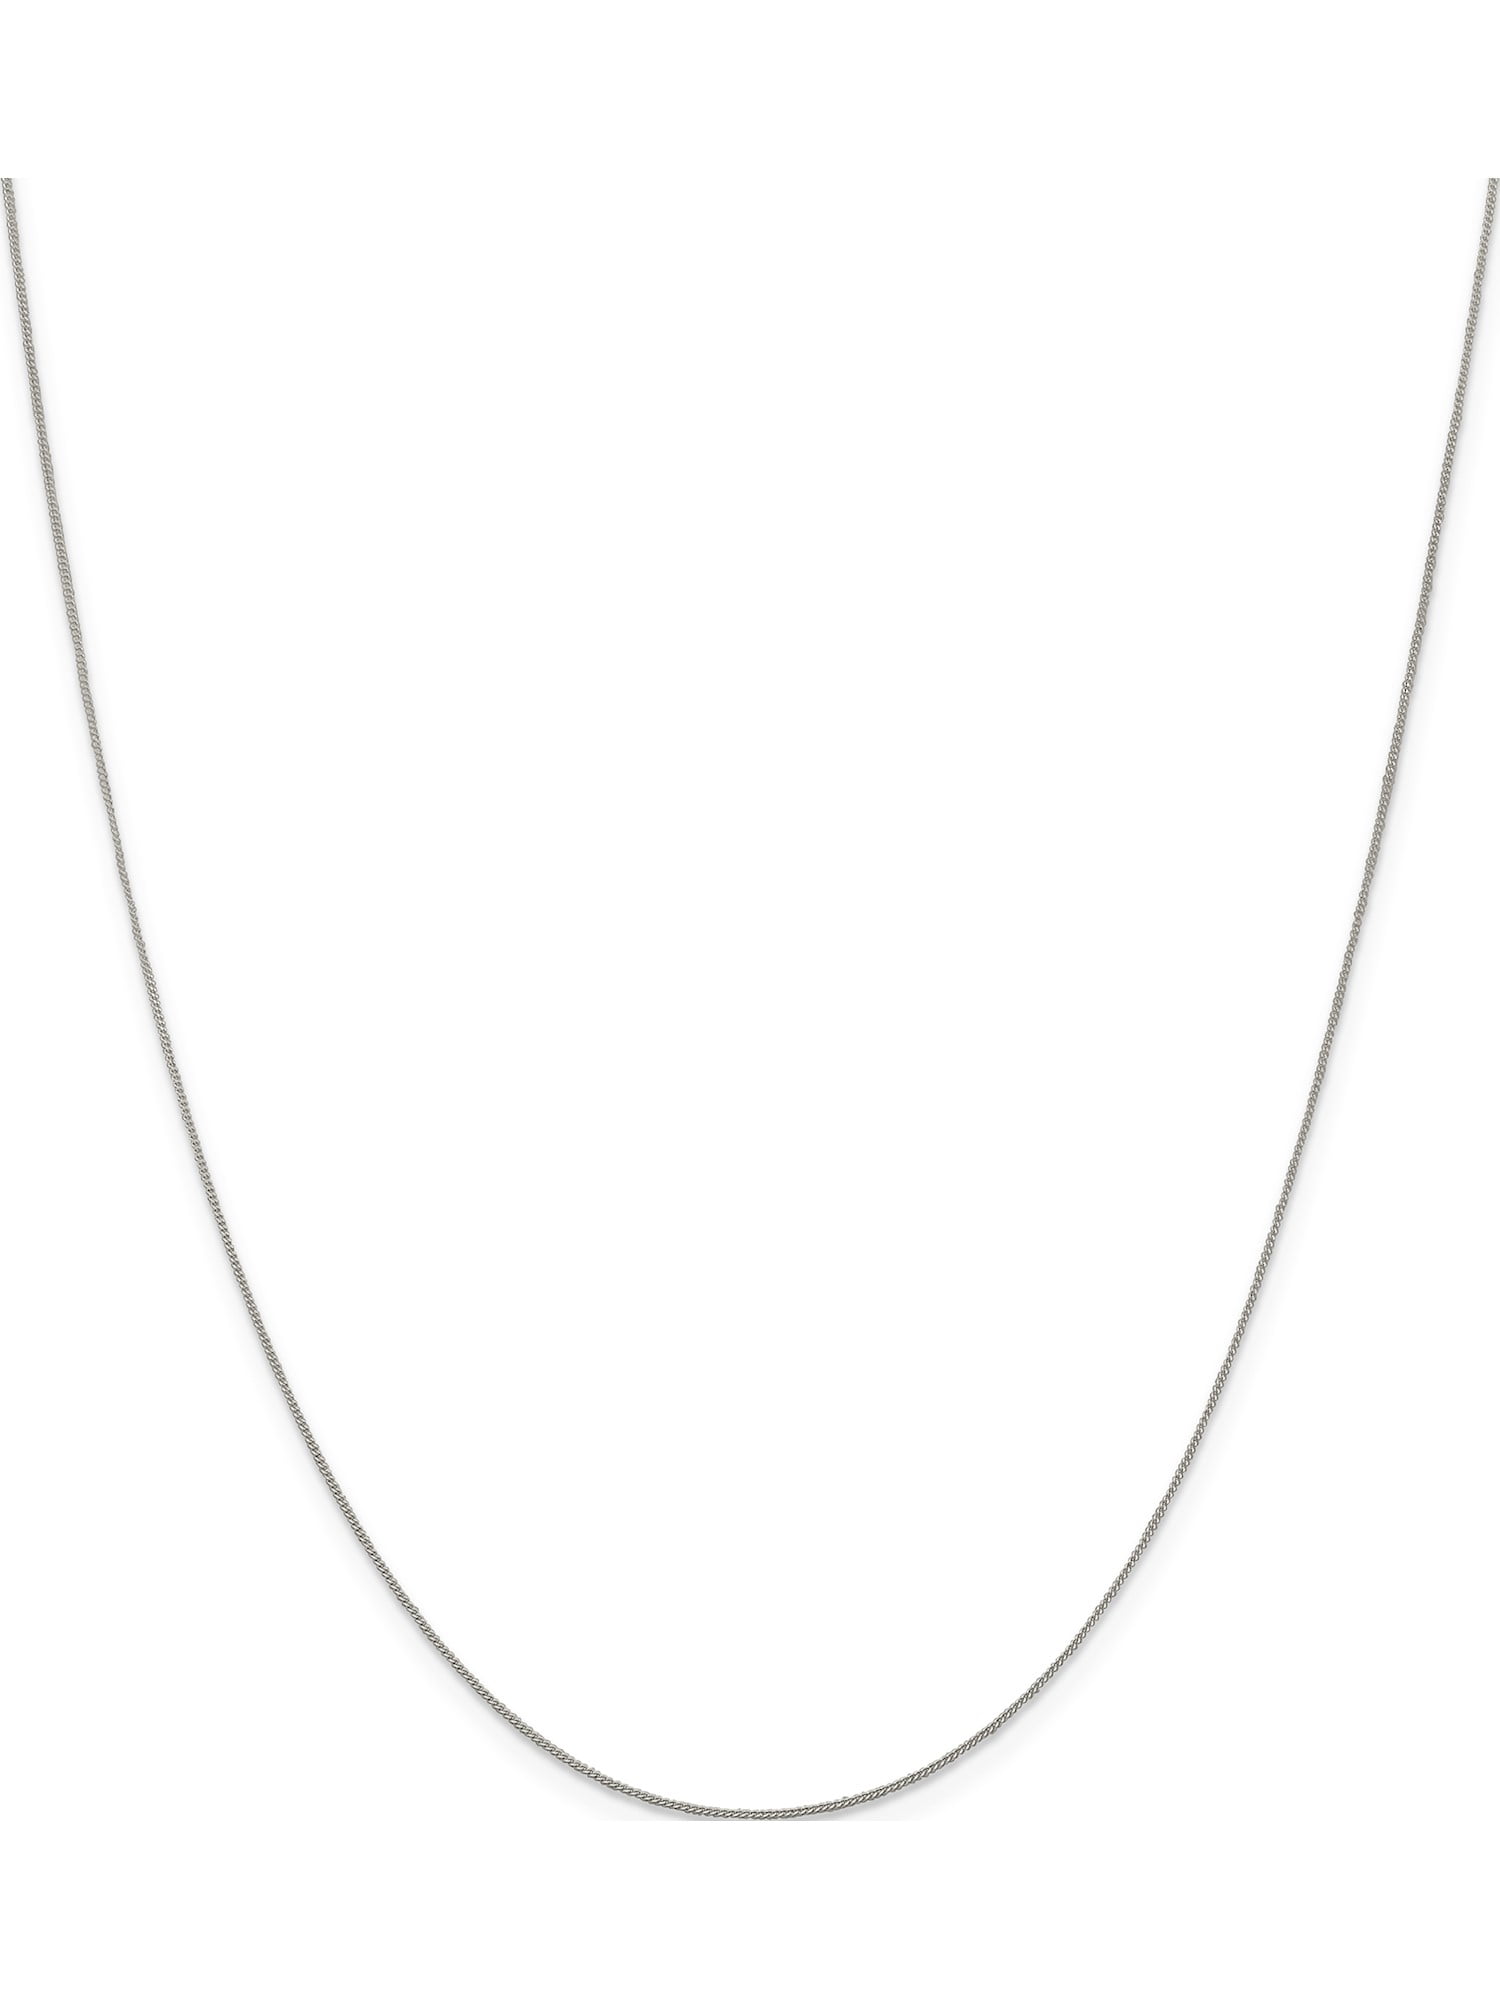 10K Sterling Silver Curb Chain Necklace Collection Mireval 14K